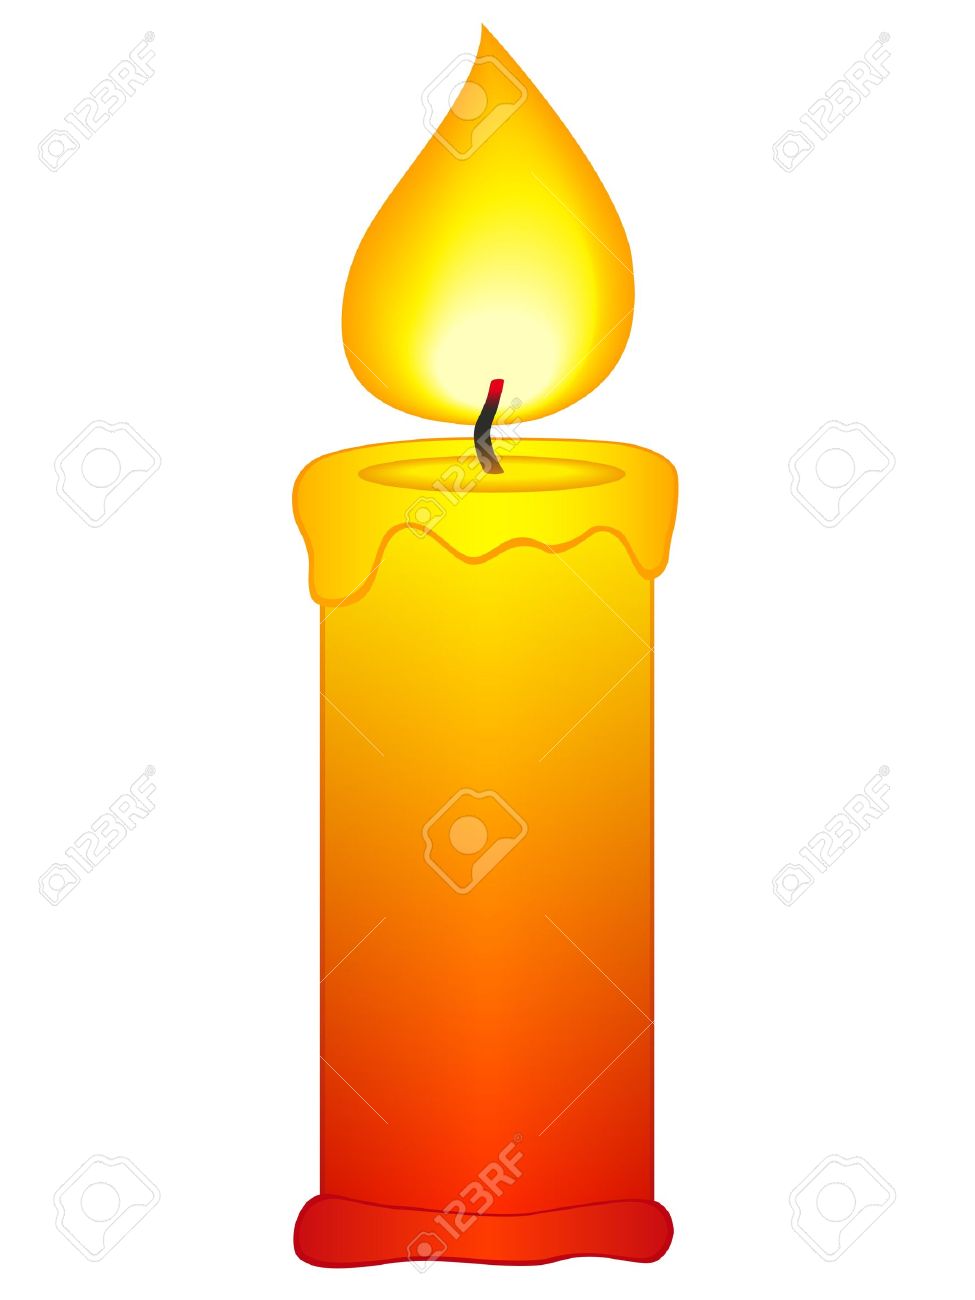 Candle Clipart | Free Downloa